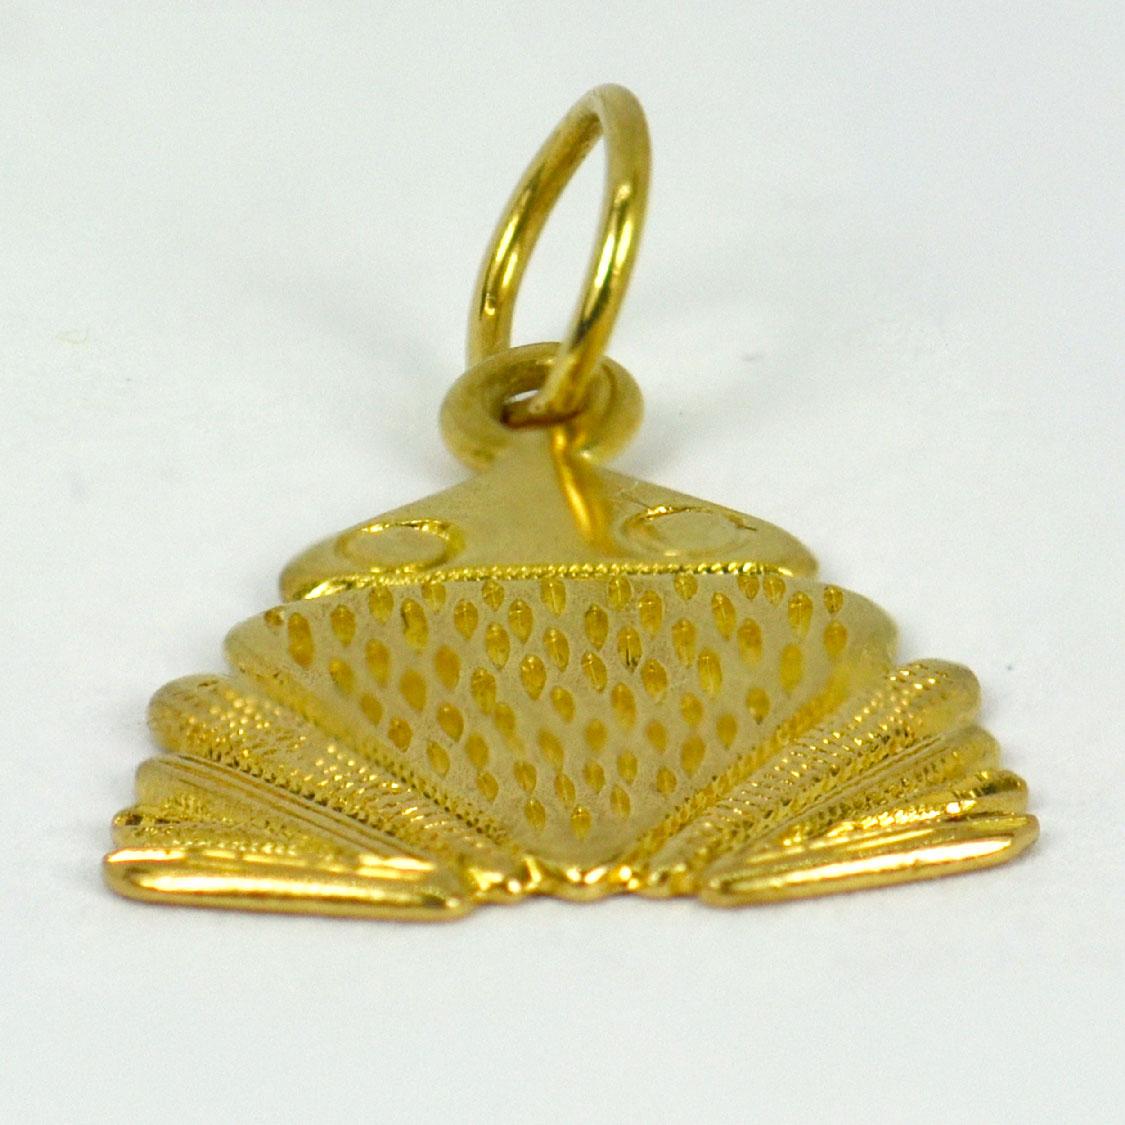 An 18 karat (18K) yellow gold charm pendant designed as a frog. Unmarked but tested for 18 karat gold.

Dimensions: 1.9 x 1.4 x 0.1 cm (not including jump ring)
Weight: 1.42 grams 
